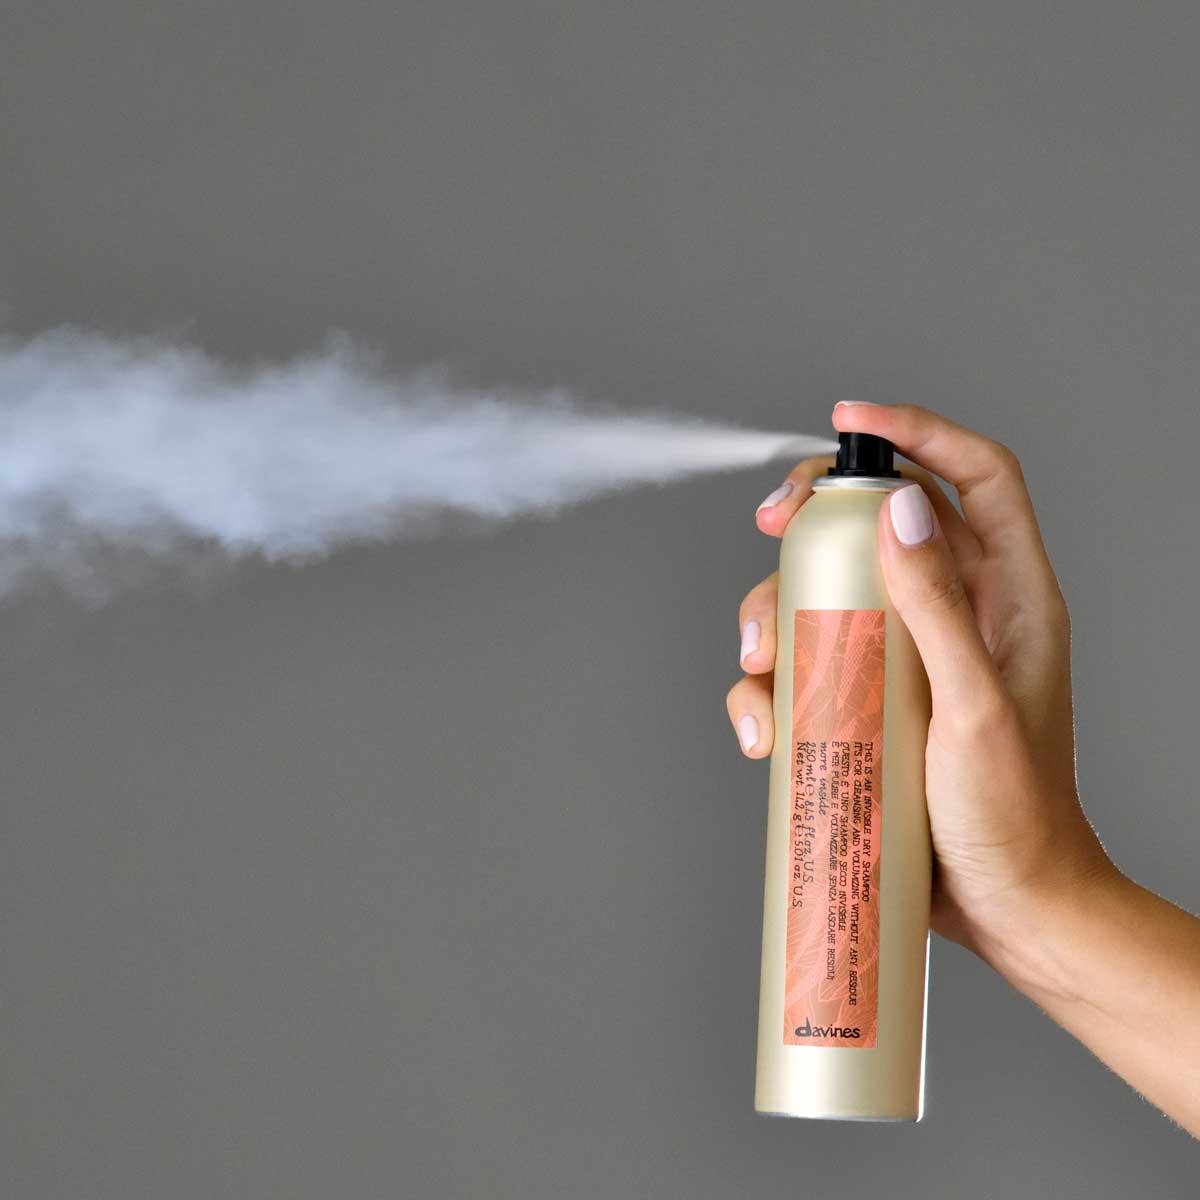 Invisible Dry Shampoo spraying